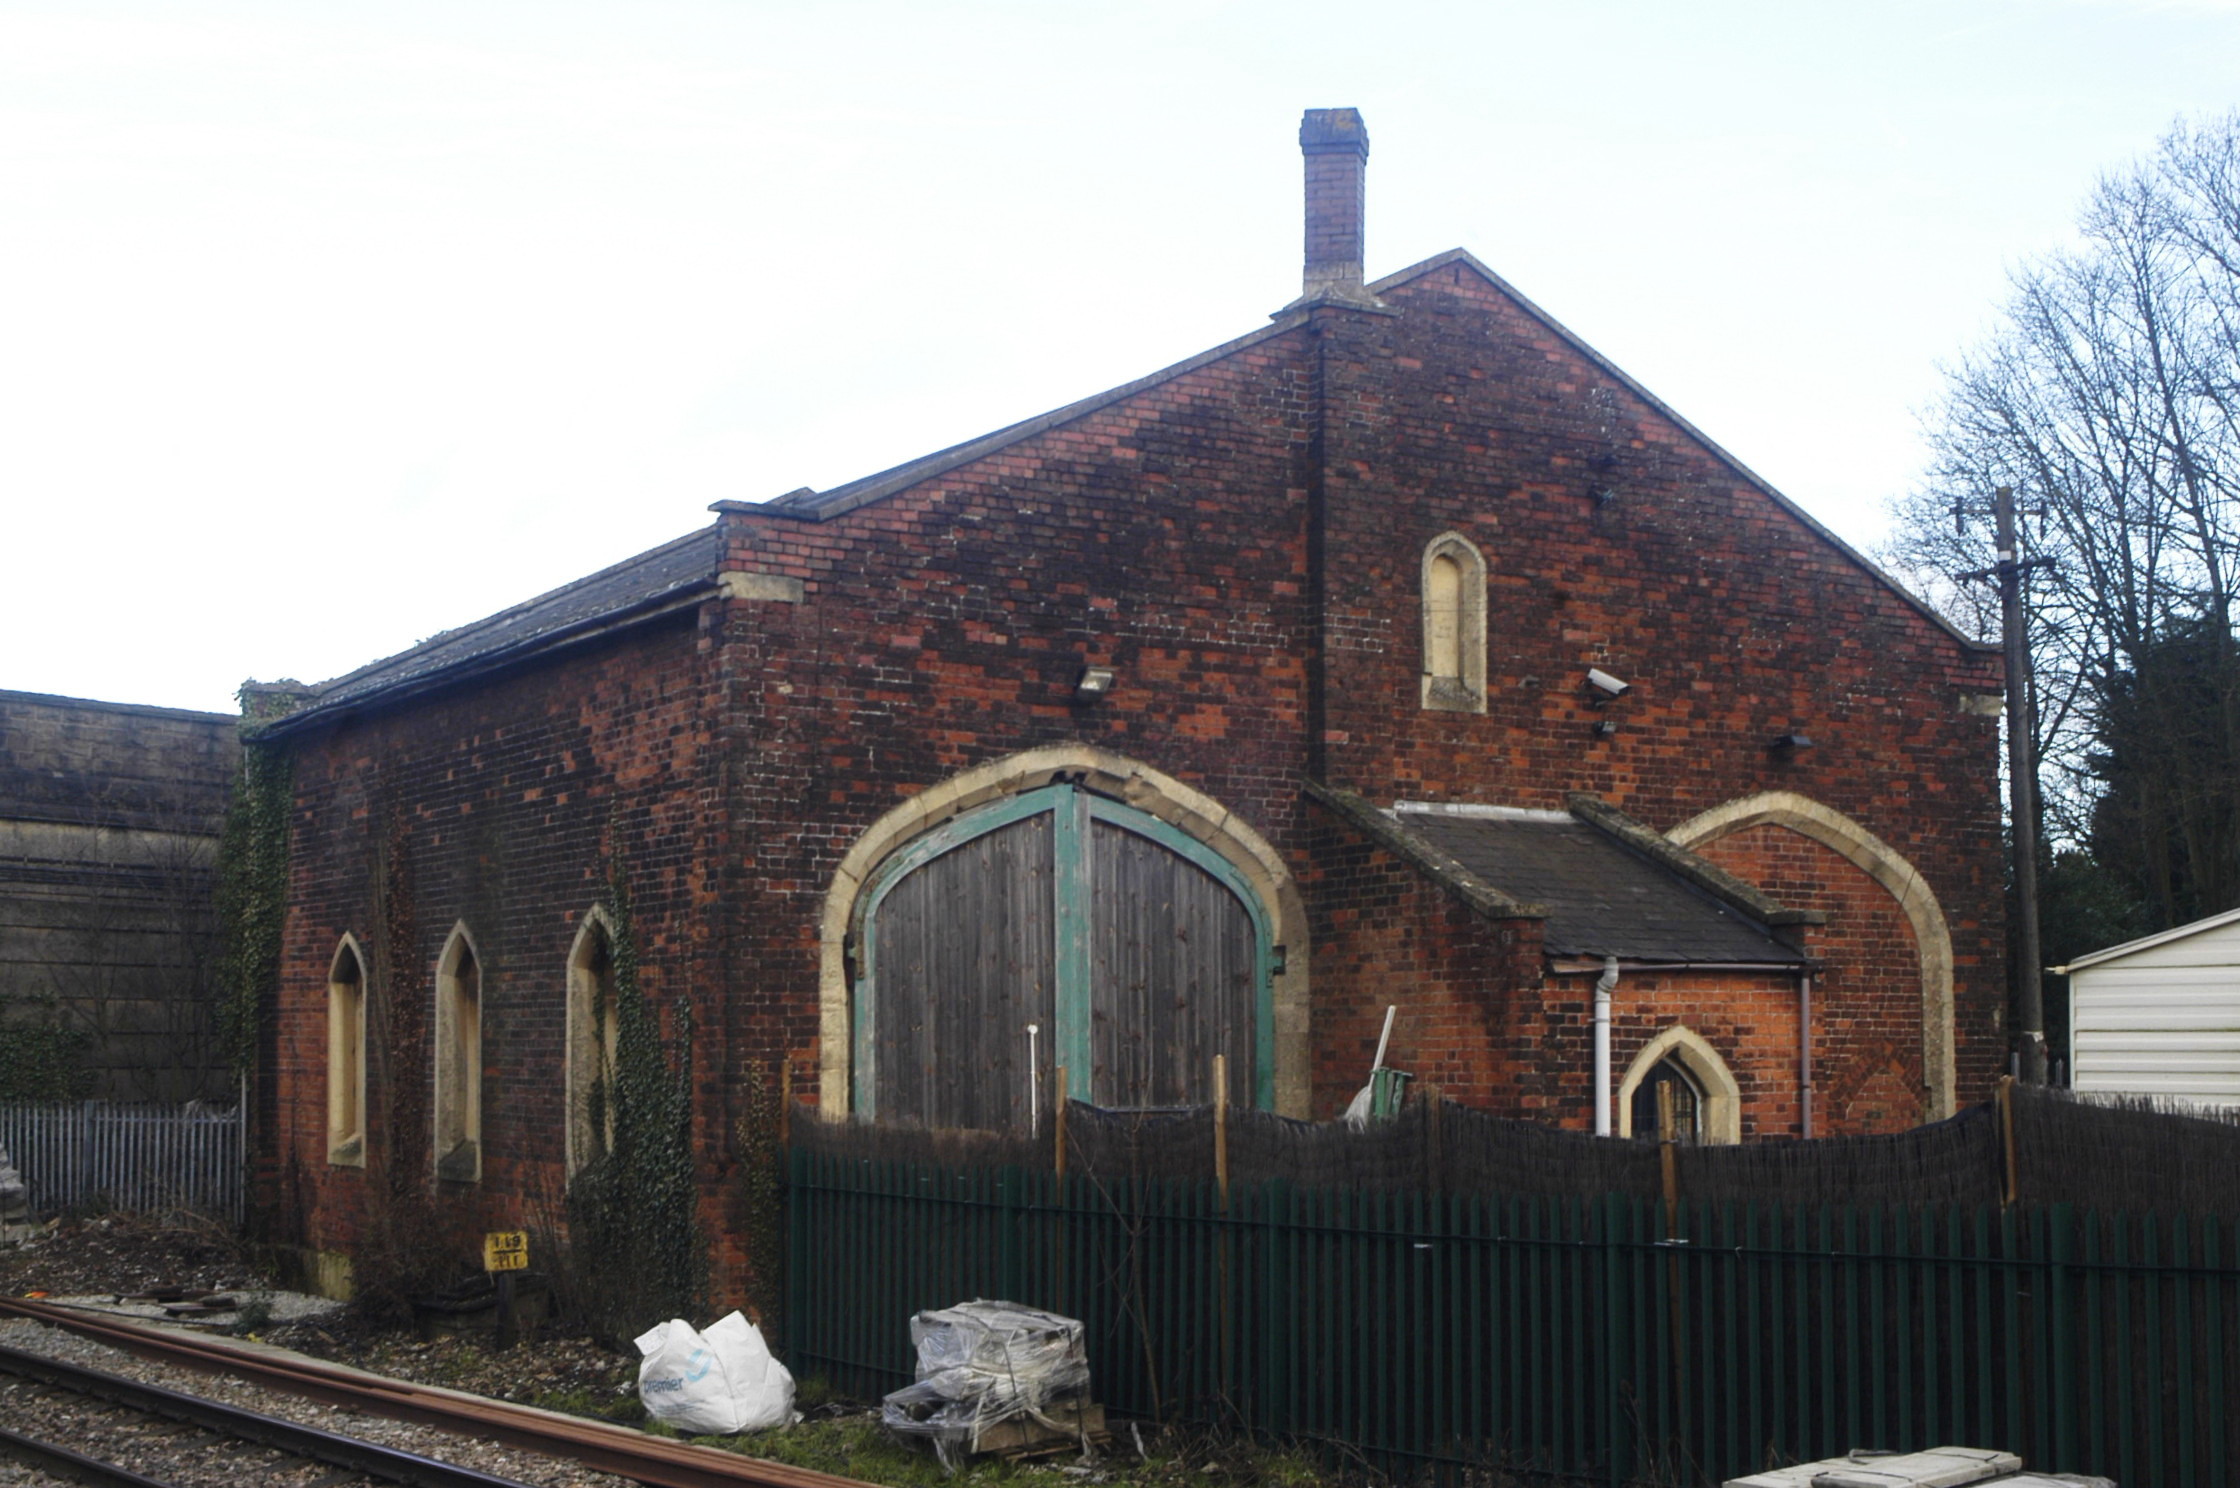 The Goods Shed, Yate Railway Station, Yate, South 